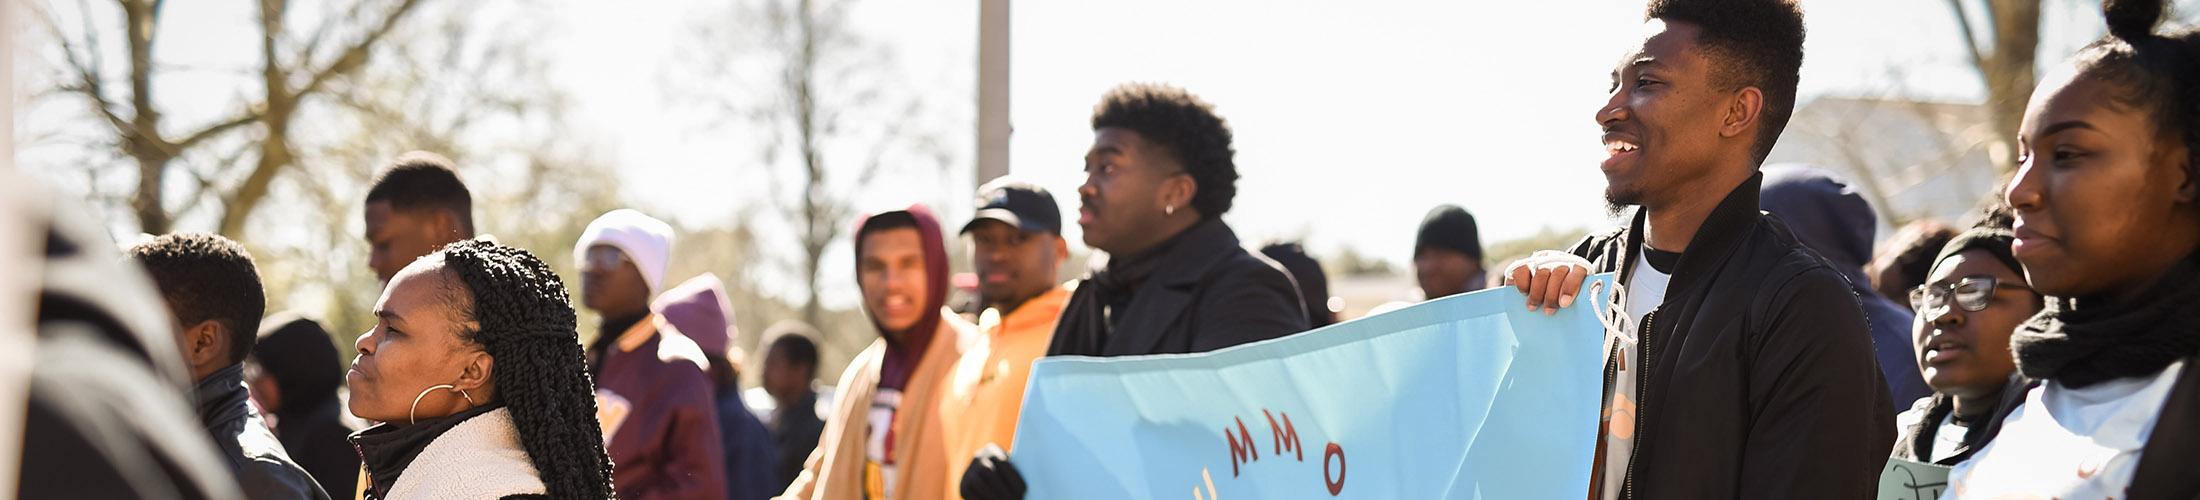 African American students marching in a parade carrying banner.